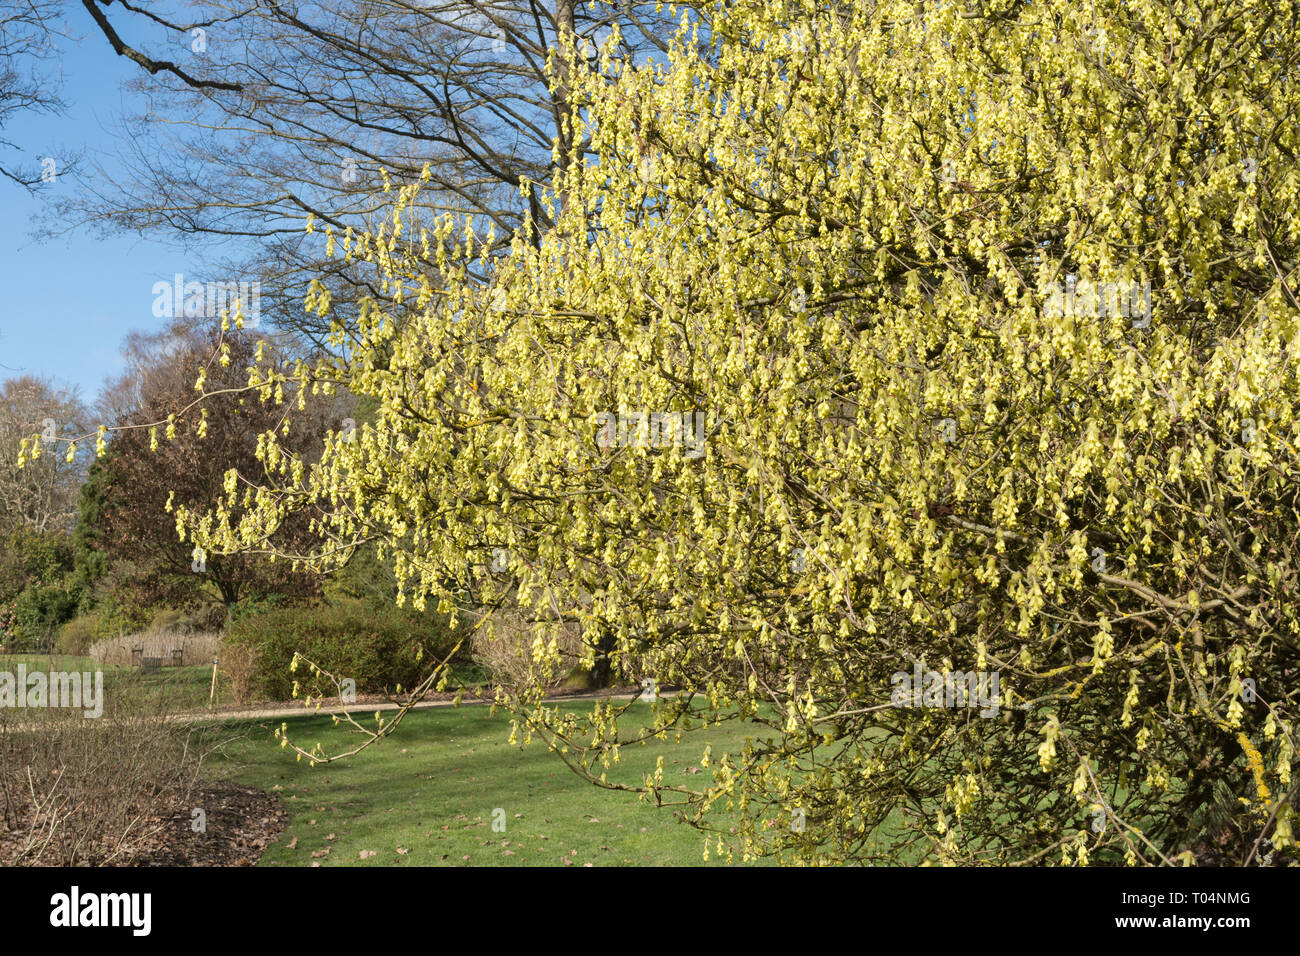 Winter hazel (Corylopsis spicata) with yellow flowers in early spring march in an English garden, UK Stock Photo